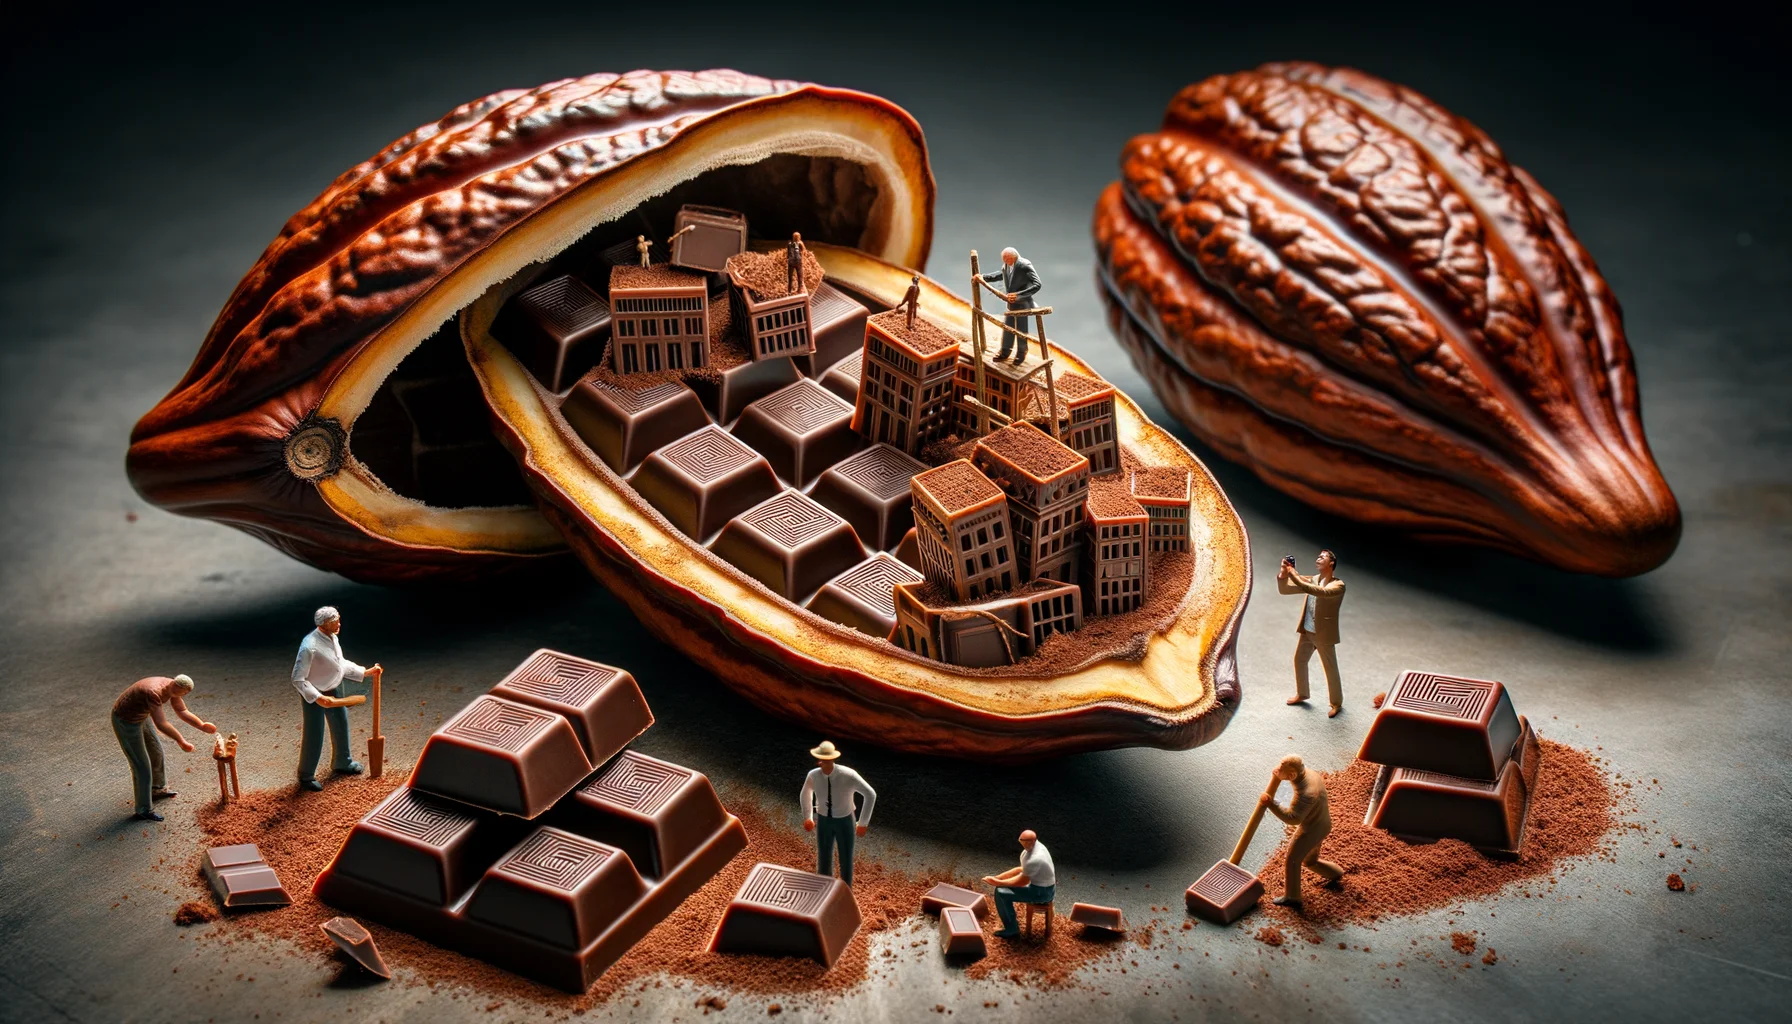 A humorous, realistic image, taken as though with a high-quality DSLR camera, depicting an unusual yet perfect scenario for artisan chocolates. Perhaps they're being worshiped by miniature people, used as precious building material in a tiny cityscape, or being dramatically revealed from within an ordinary cacao pod. The scene is creatively staged to highlight the crafted detail and appeal of these gourmet treats.